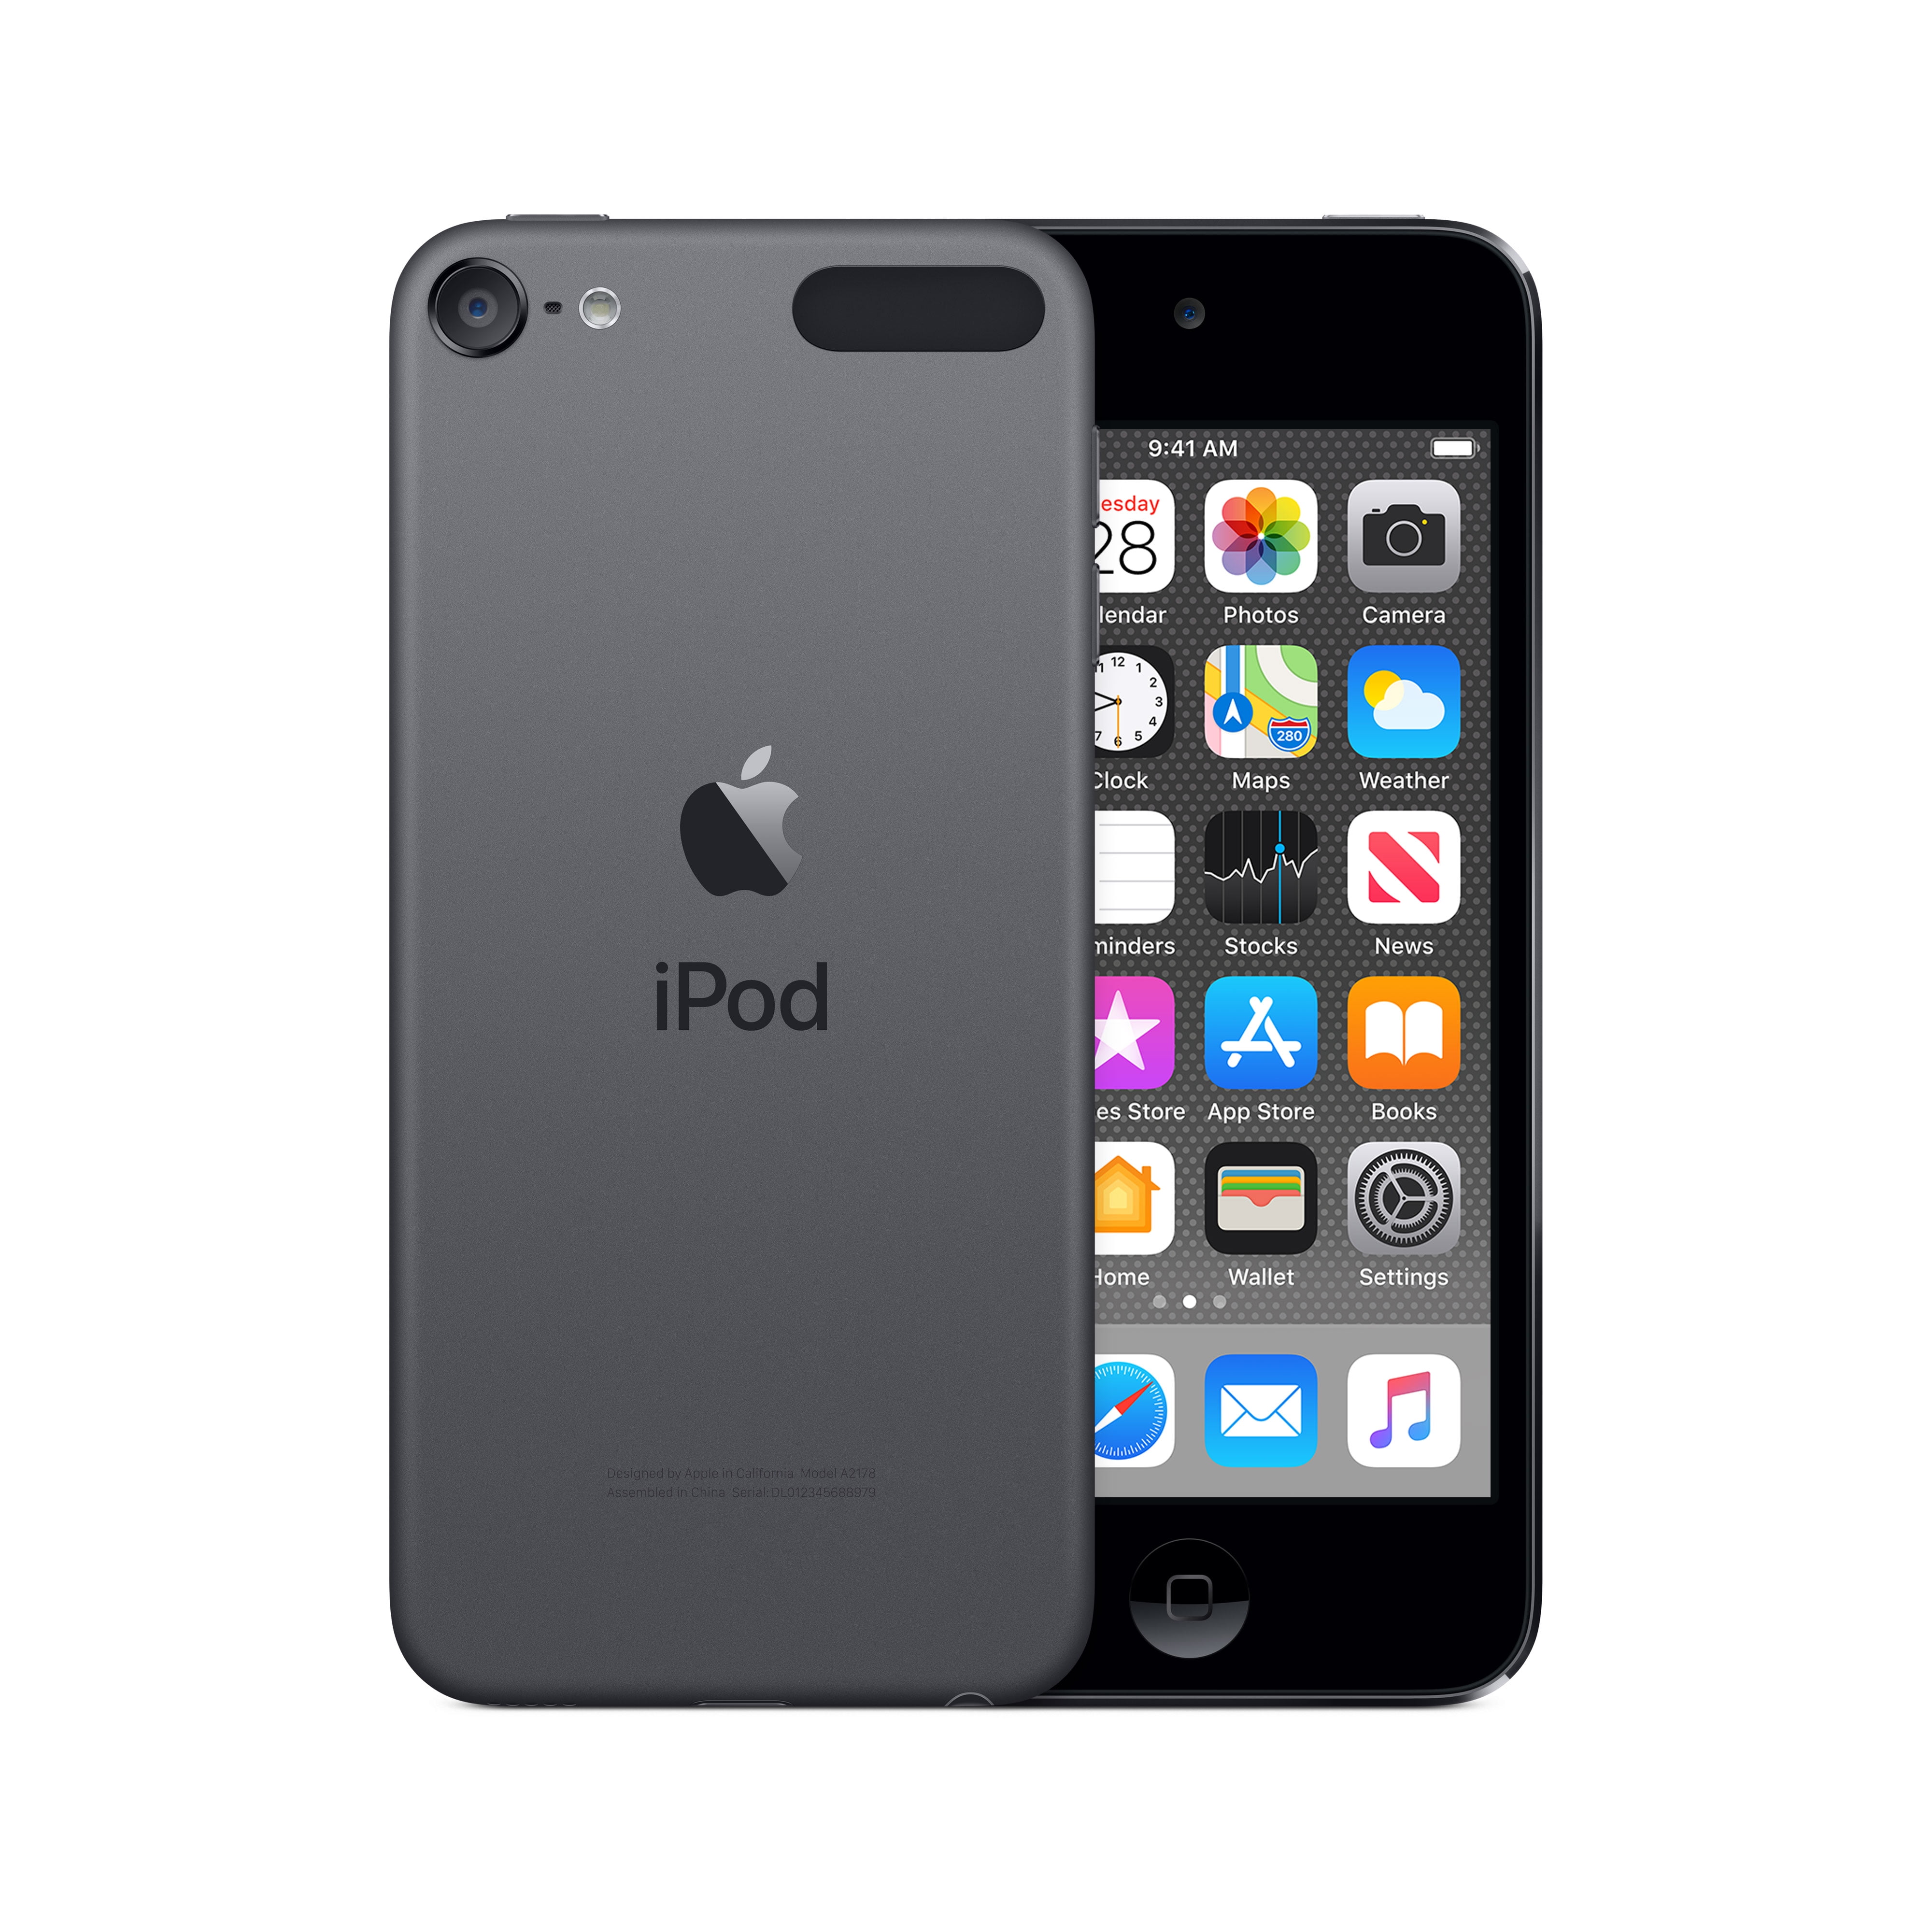 iPod touch 7th Generation - Space Gray (New Model) Walmart.com